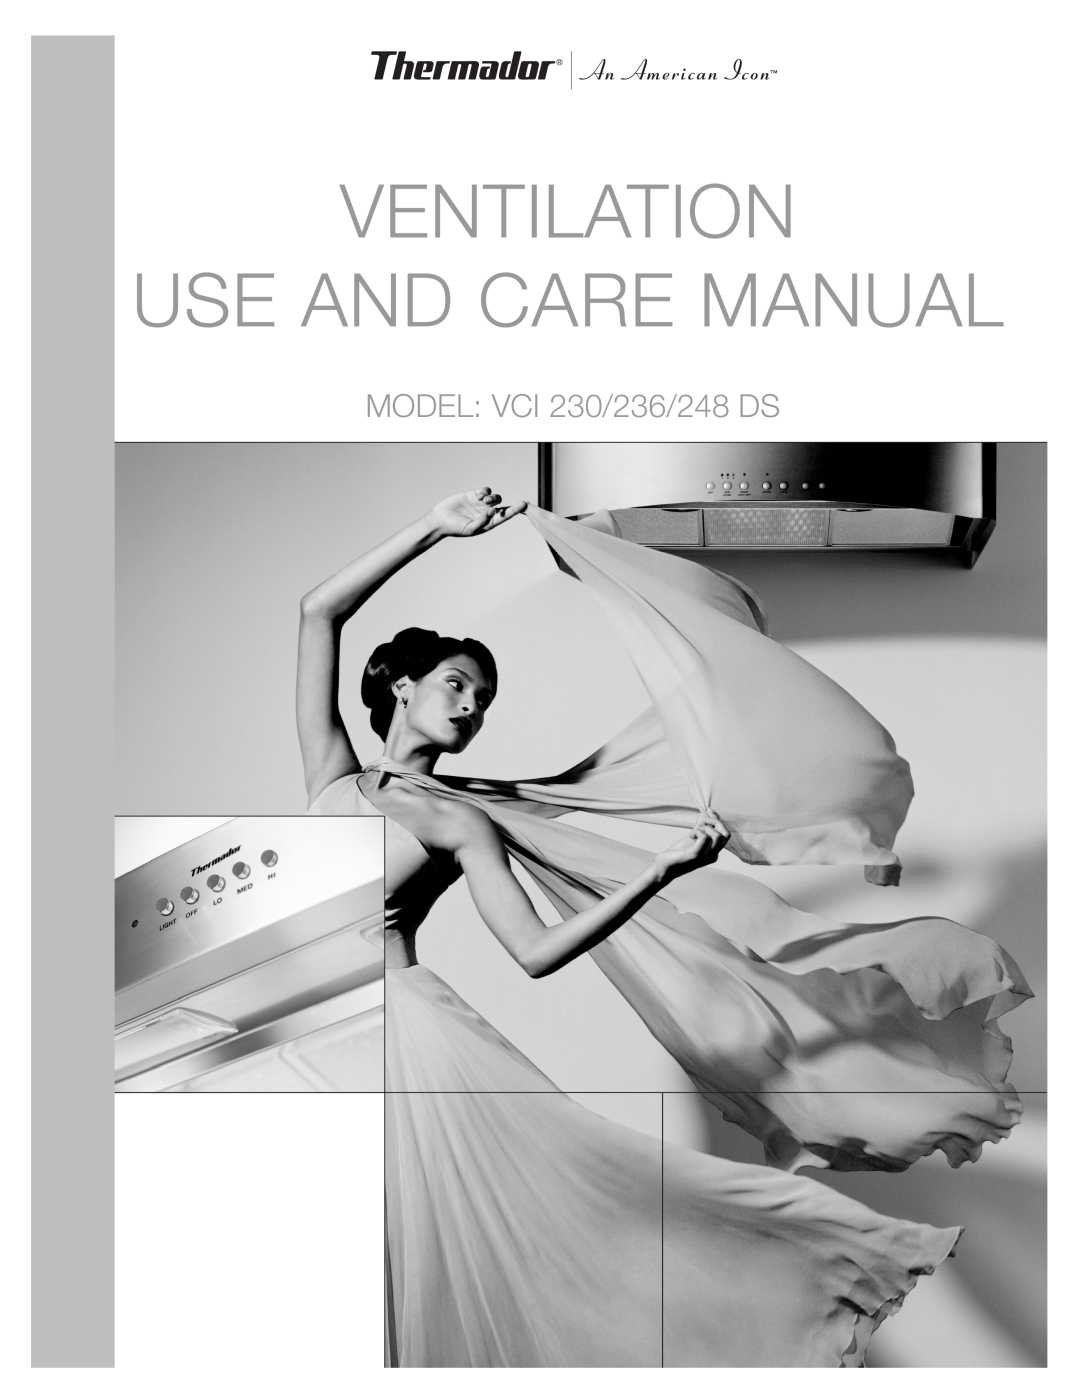 Thermador VCI230DS, VCI248DS, VCI236DS, VCI 230 installation manual Ventilventilationa Ion, Useinstandllationcare Manual 